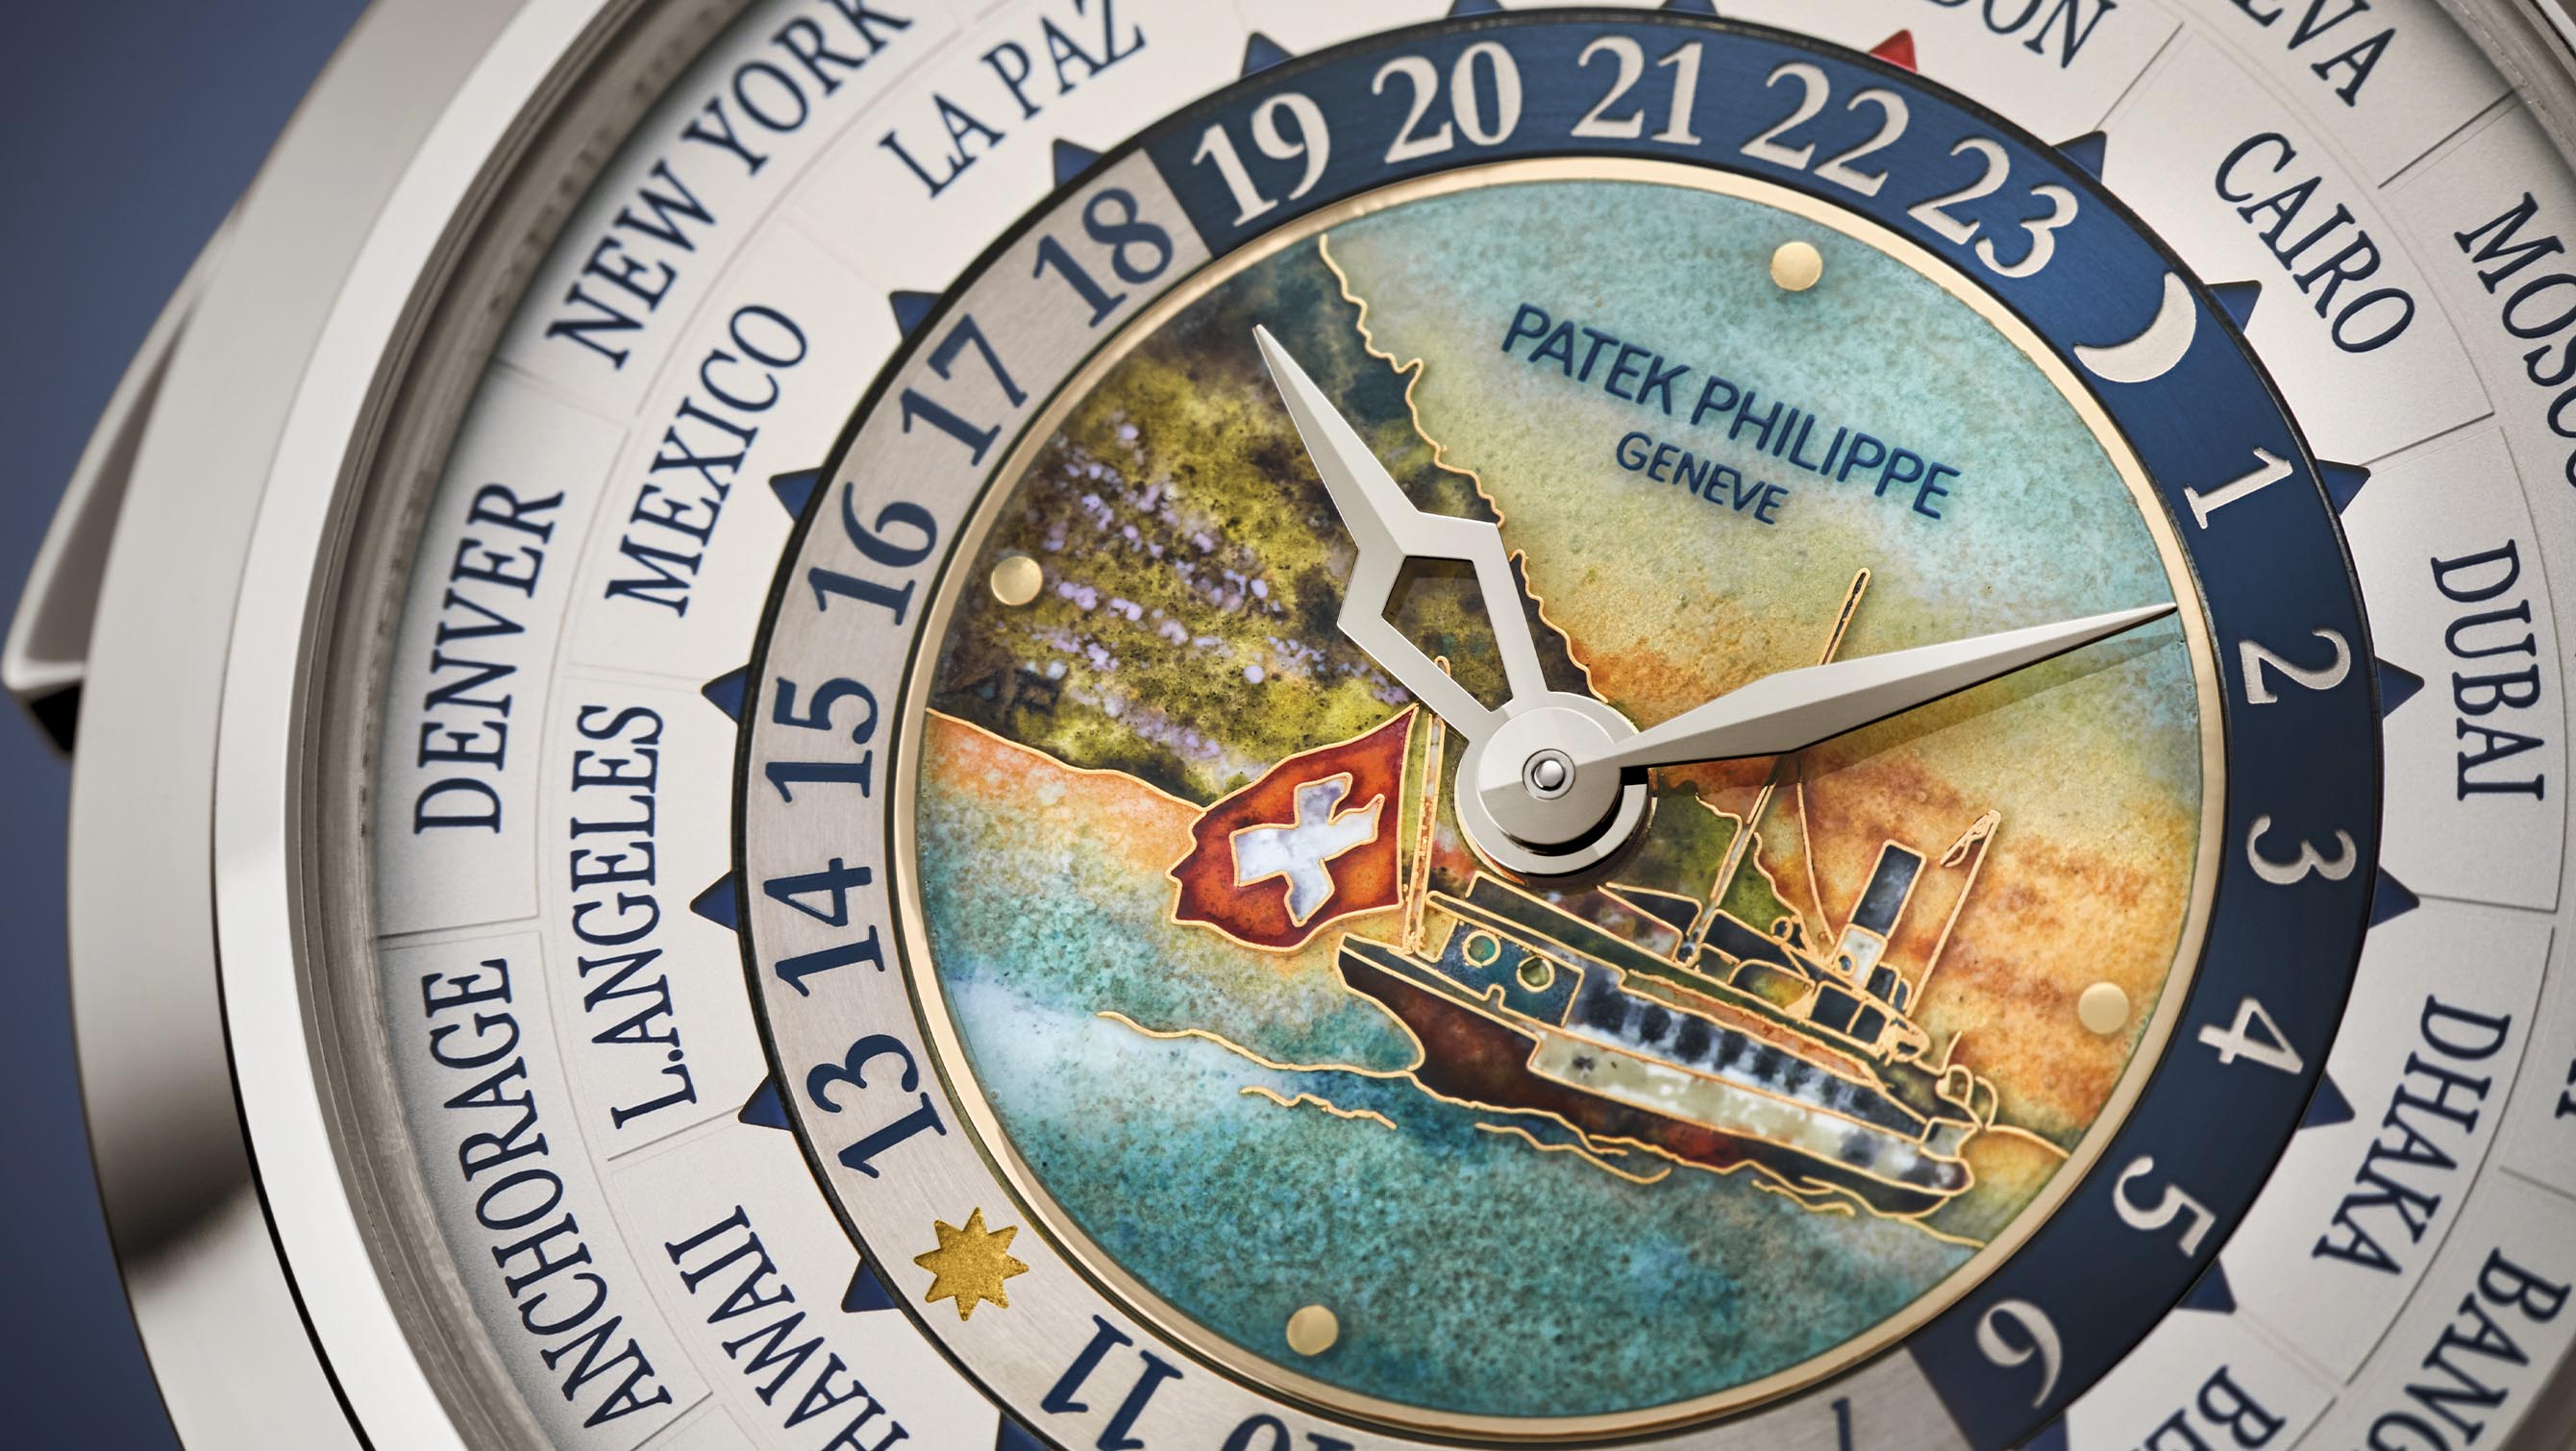 Cloisonné mastery of the Patek Philippe 5531G Grand Complications